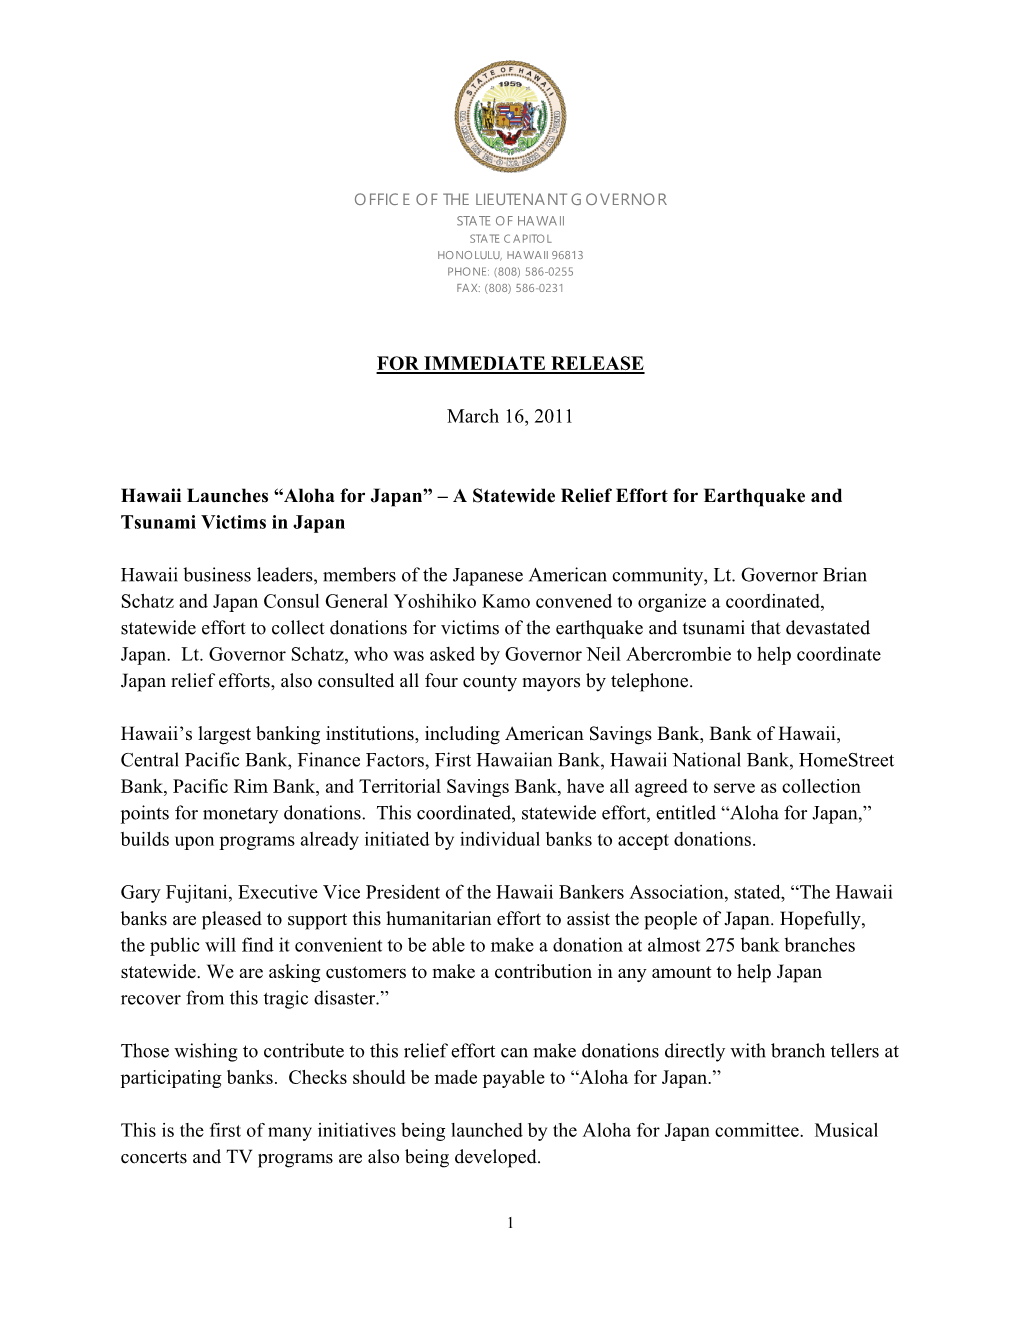 FOR IMMEDIATE RELEASE March 16, 2011 Hawaii Launches “Aloha for Japan” – a Statewide Relief Effort for Earthquake and Tsun